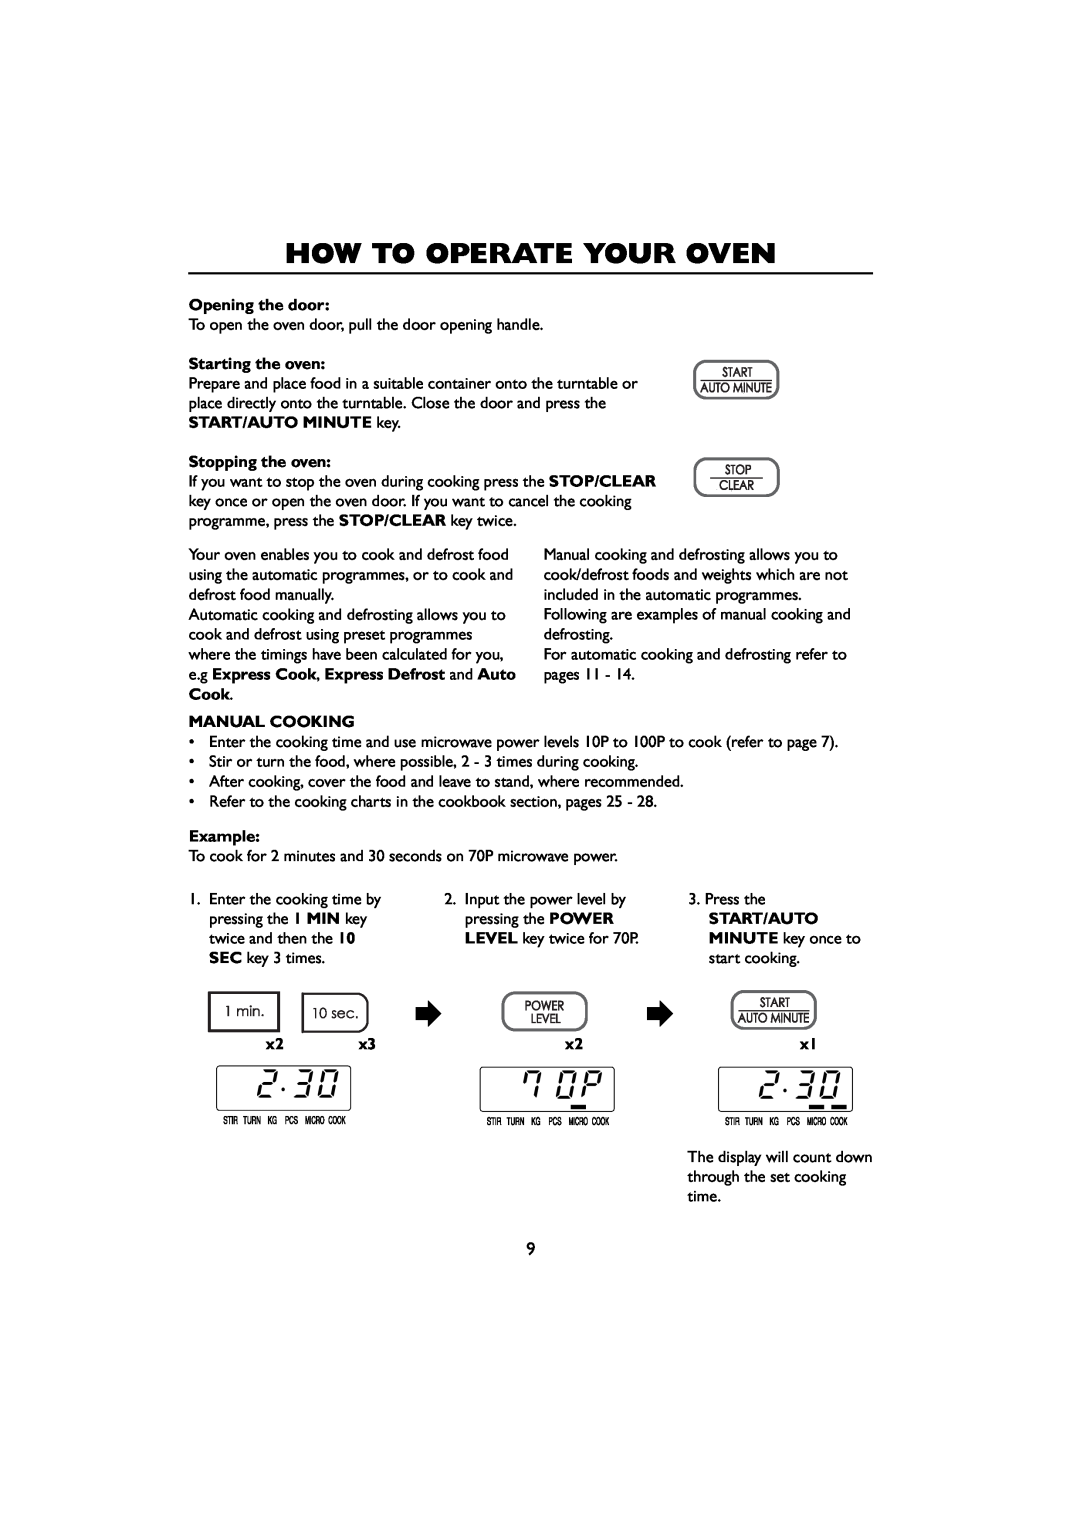 Sharp R-259 How To Operate Your Oven, Opening the door, Starting the oven, Stopping the oven, Cook MANUAL COOKING, Example 